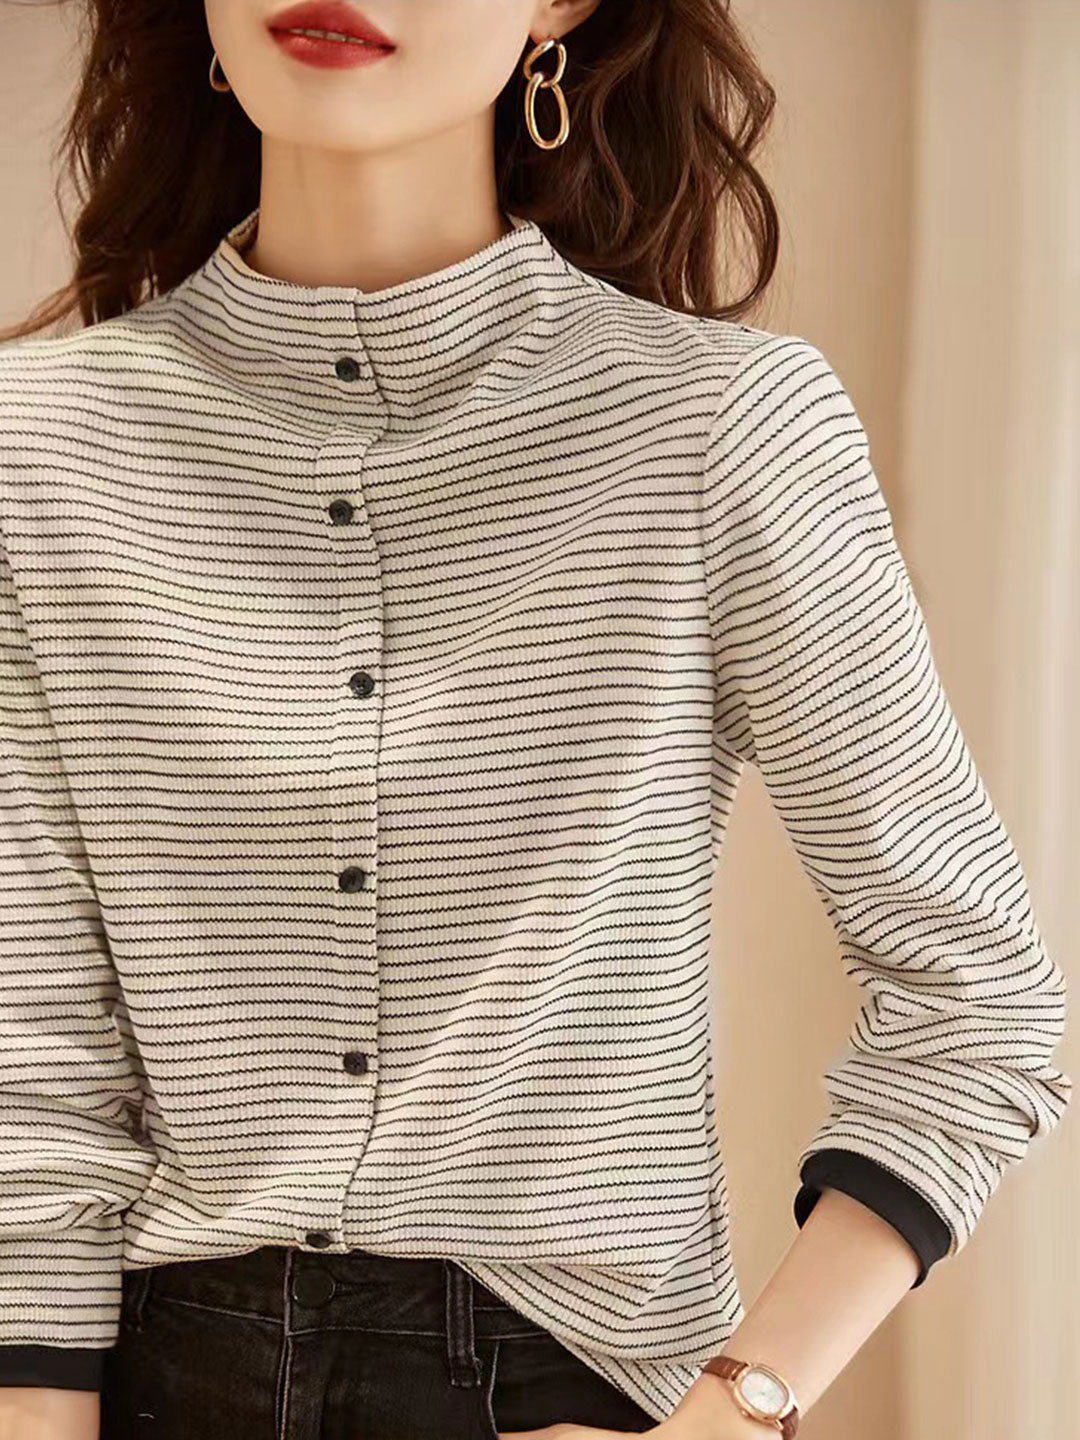 Isabella Classic Turtleneck Contrasted Striped Knitted Top